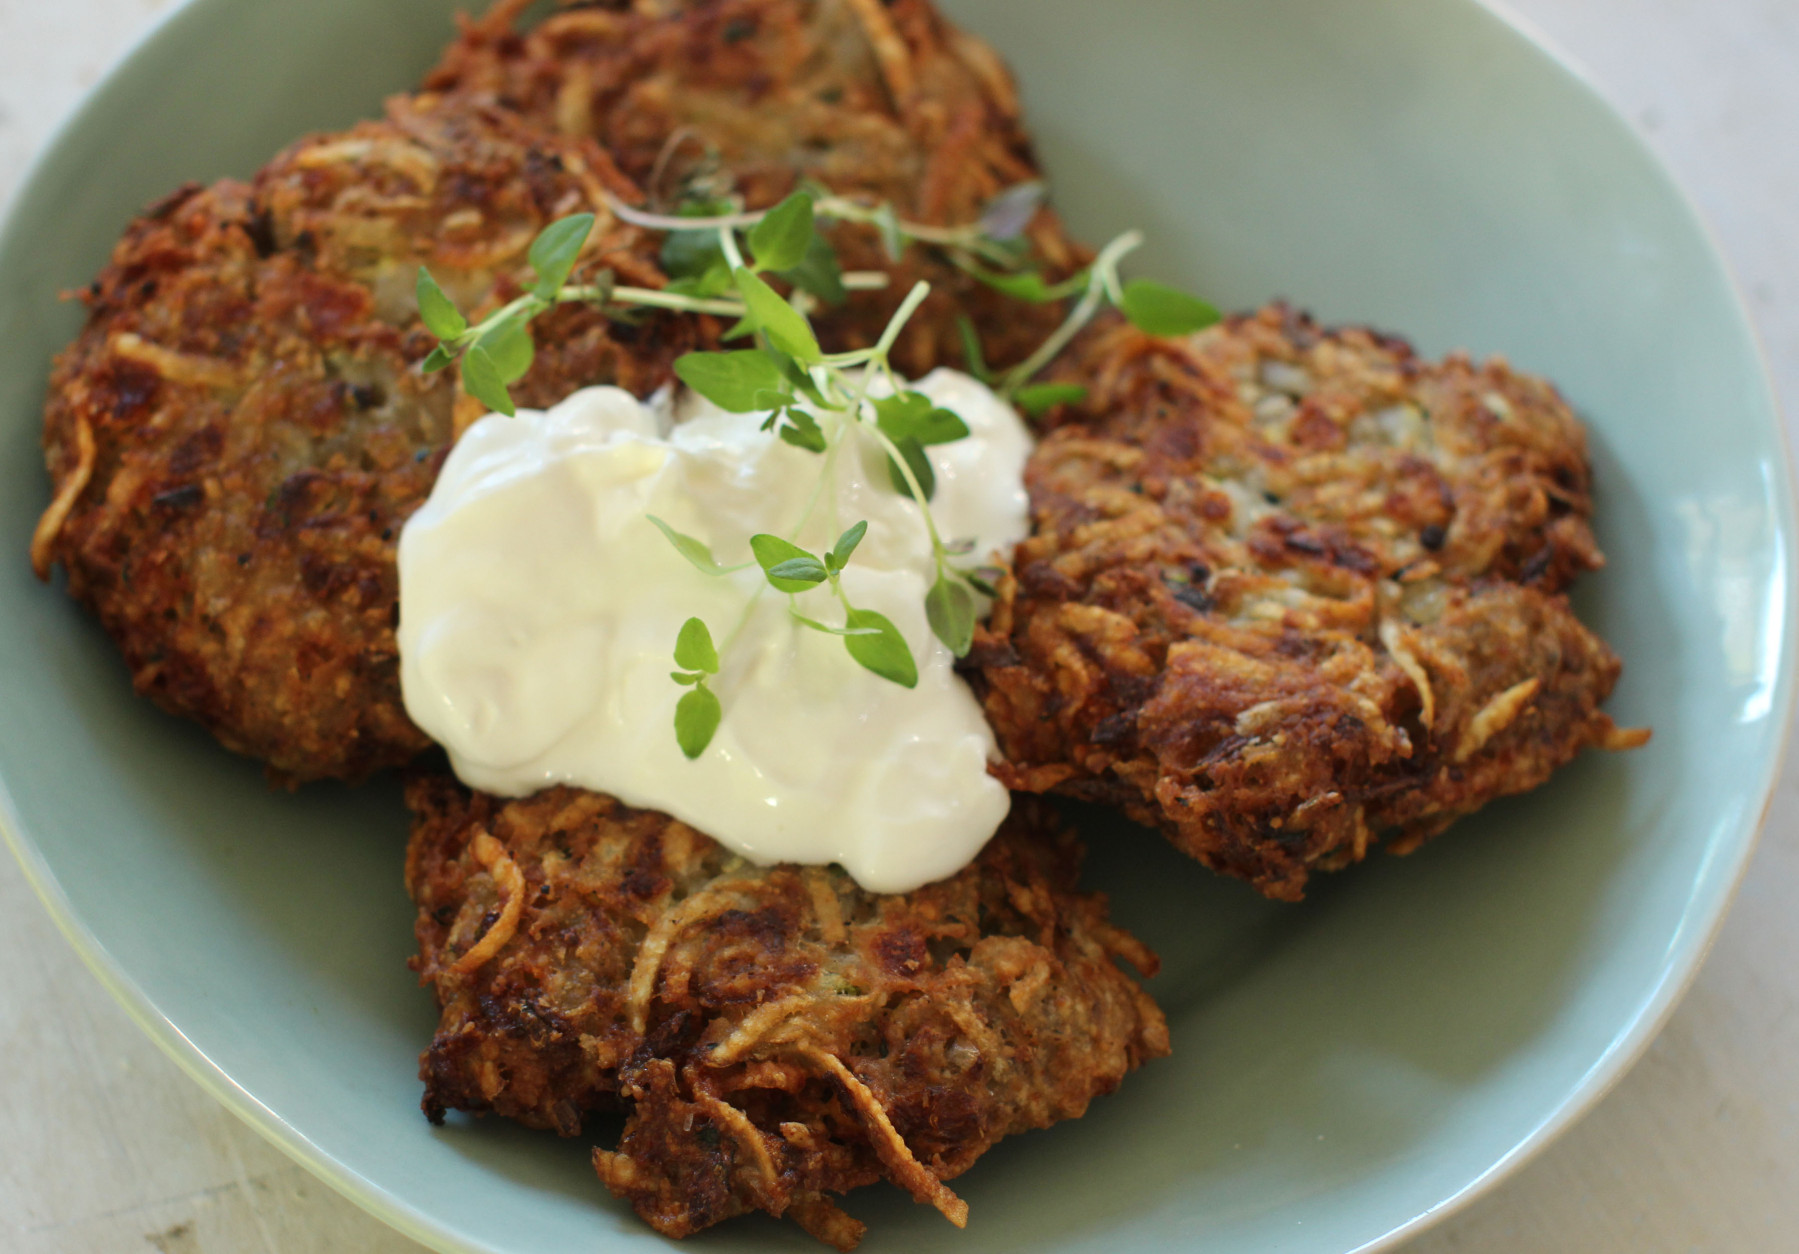 This Oct. 19, 2015 photo shows zesty zucchini and feta latkes in Concord, N.H. This dish is from a recipe by Alison Ladman. (AP Photo/Matthew Mead)